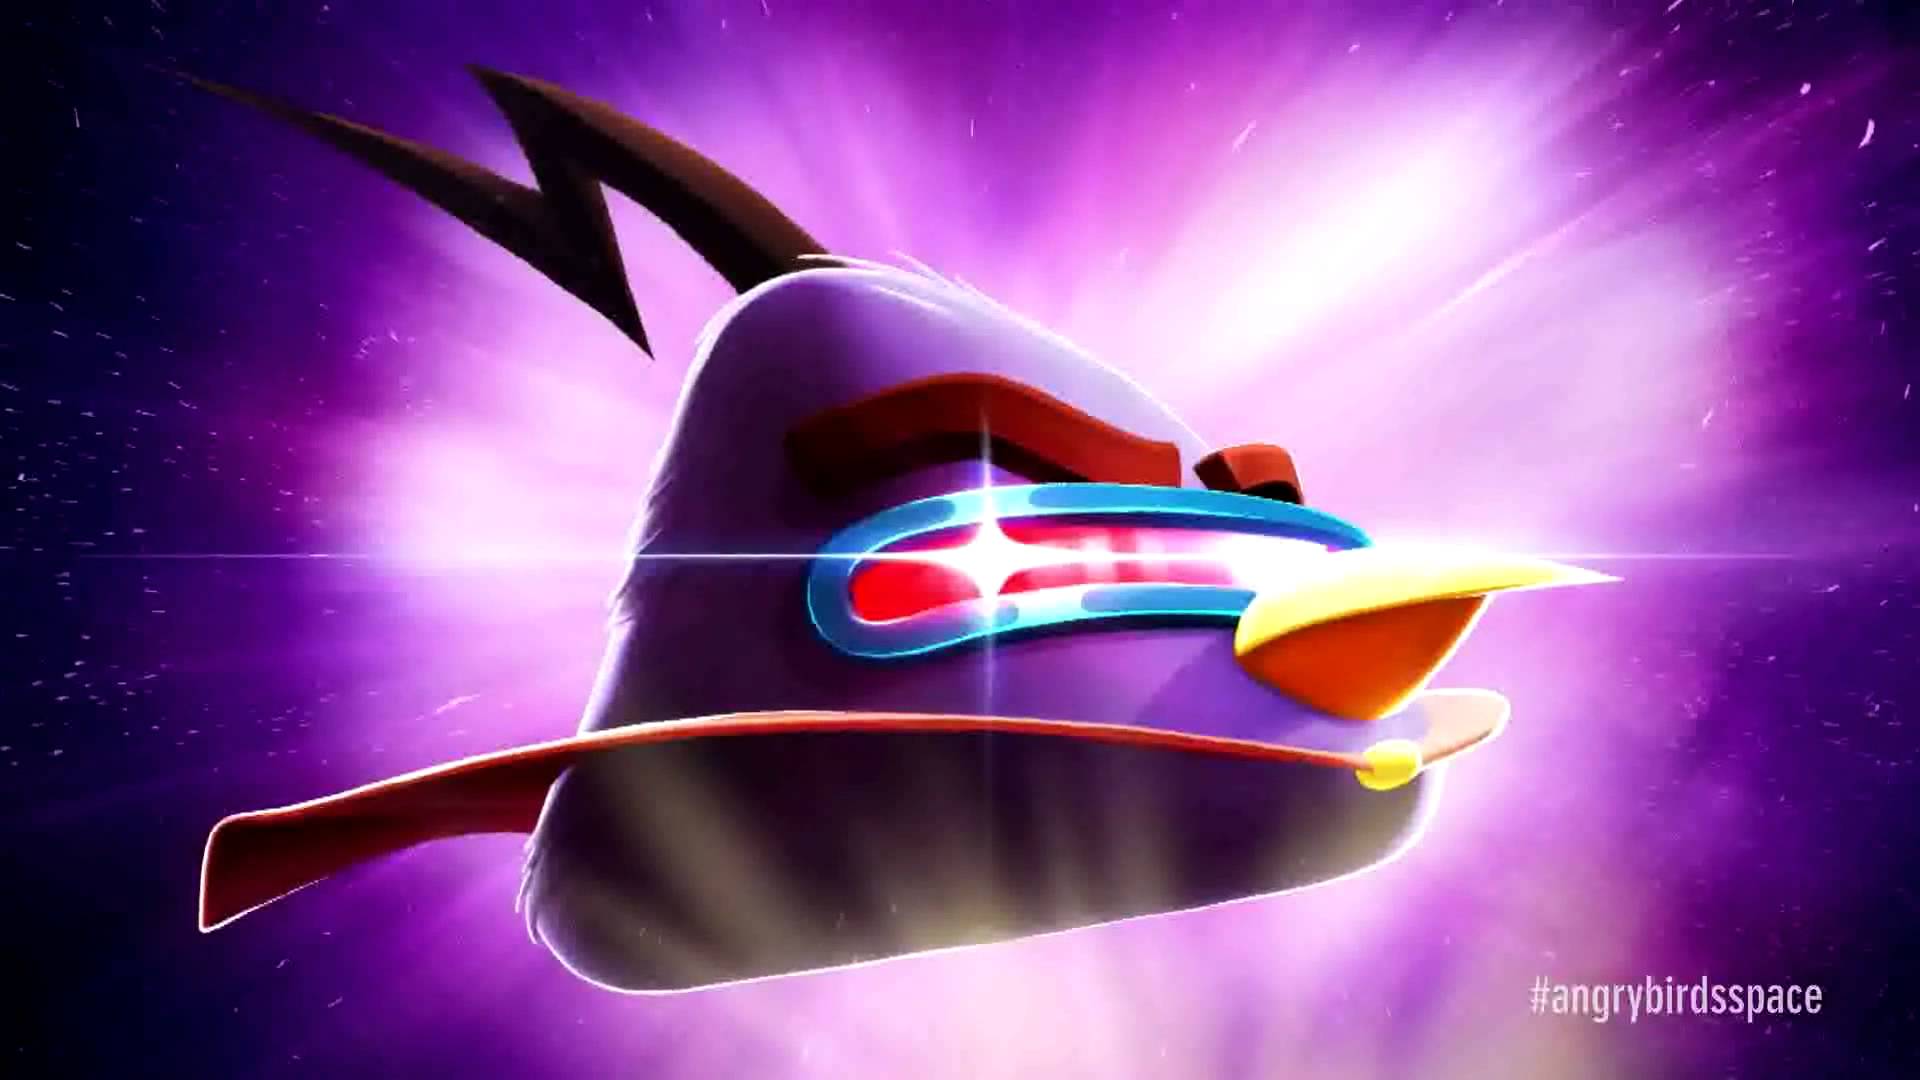 Angry Birds Space wallpaper, Video Game, HQ Angry Birds Space